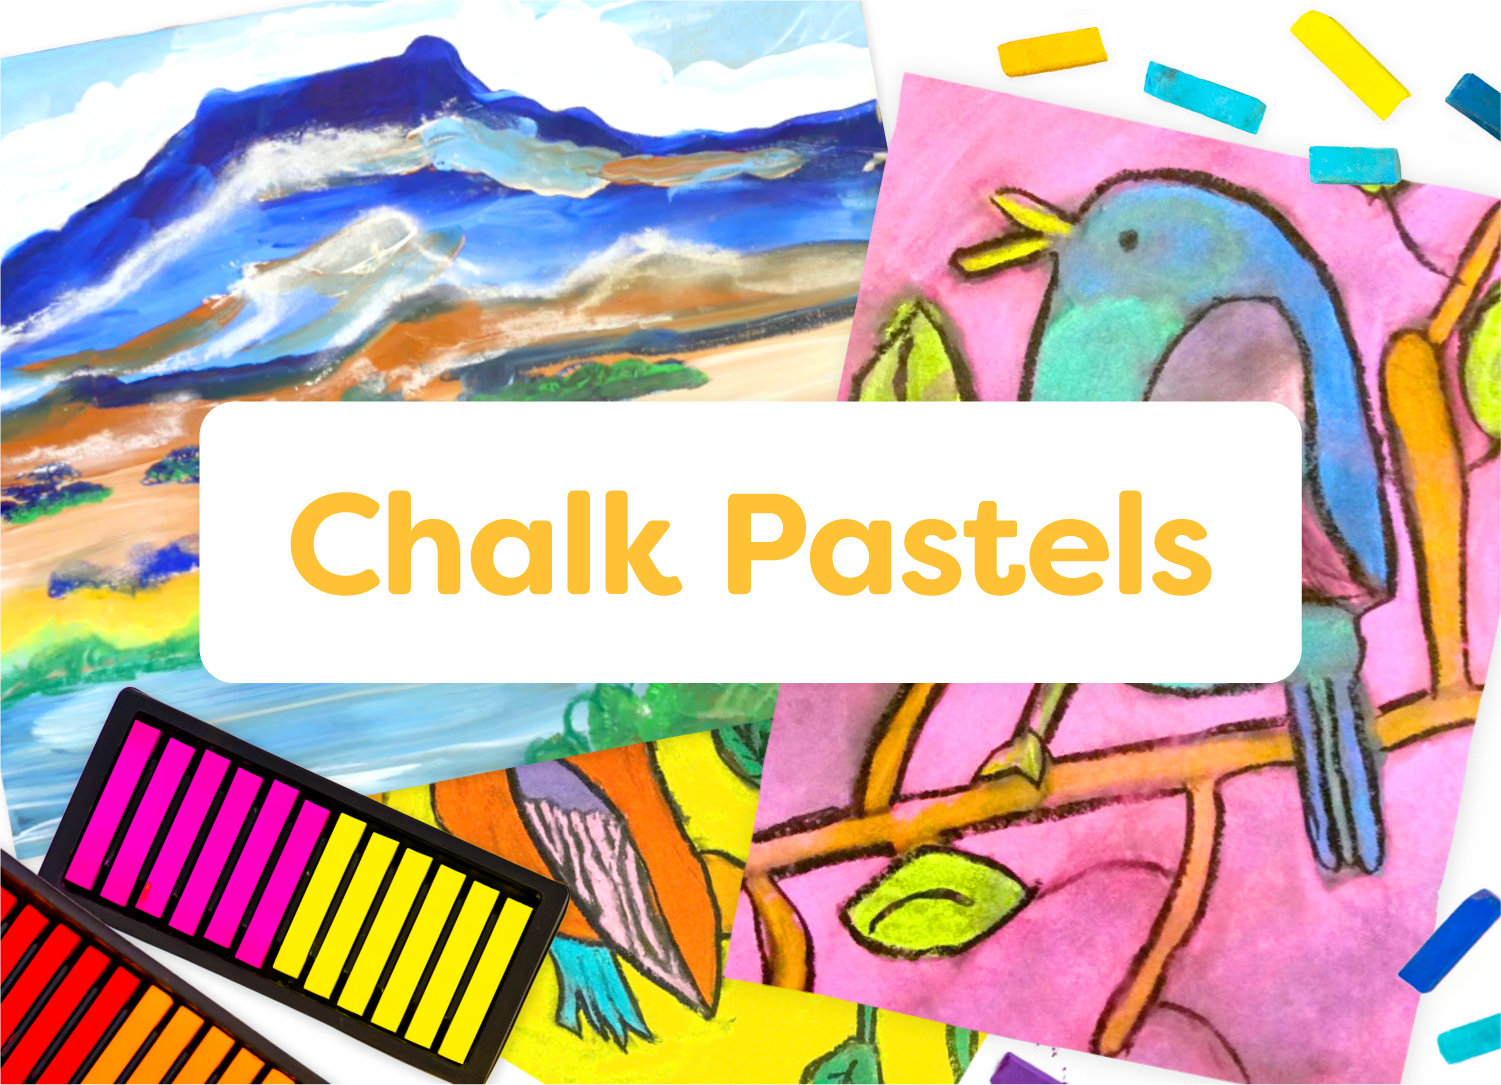 Chalk Pastels; art lessons for kids by category